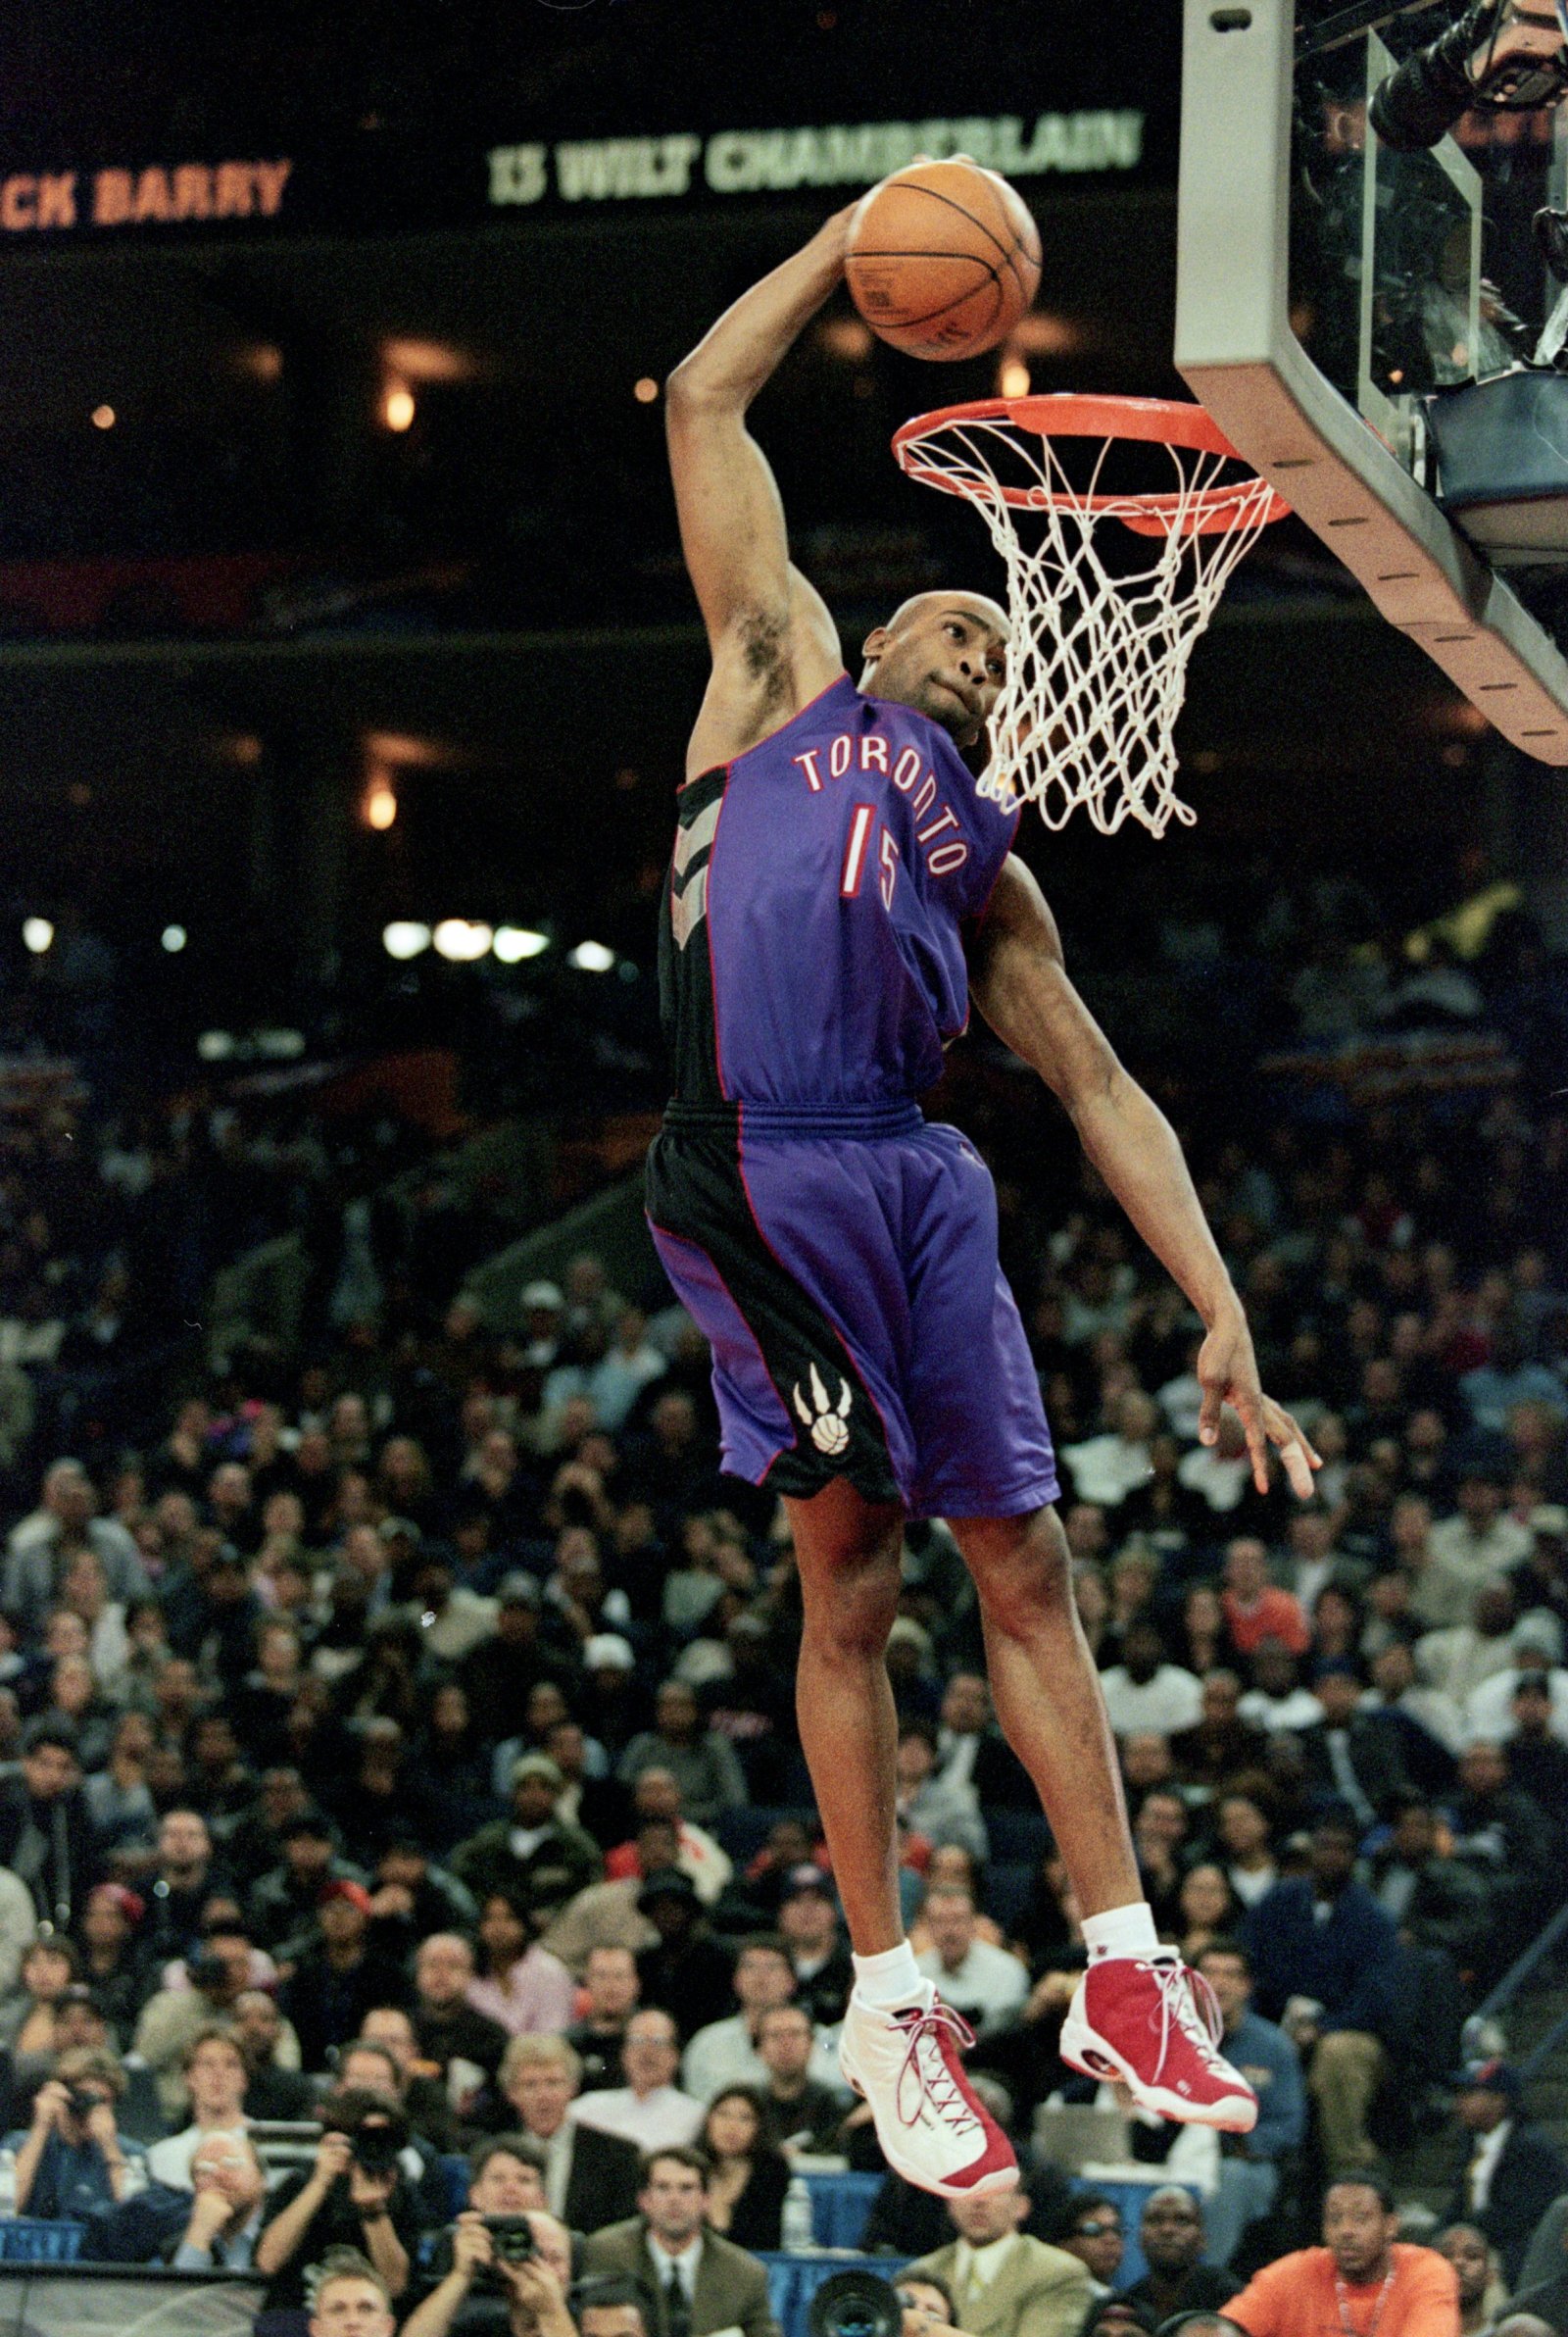 Tracy McGrady of the Toronto Raptors goes for a dunk in the Slam Dunk  News Photo - Getty Images